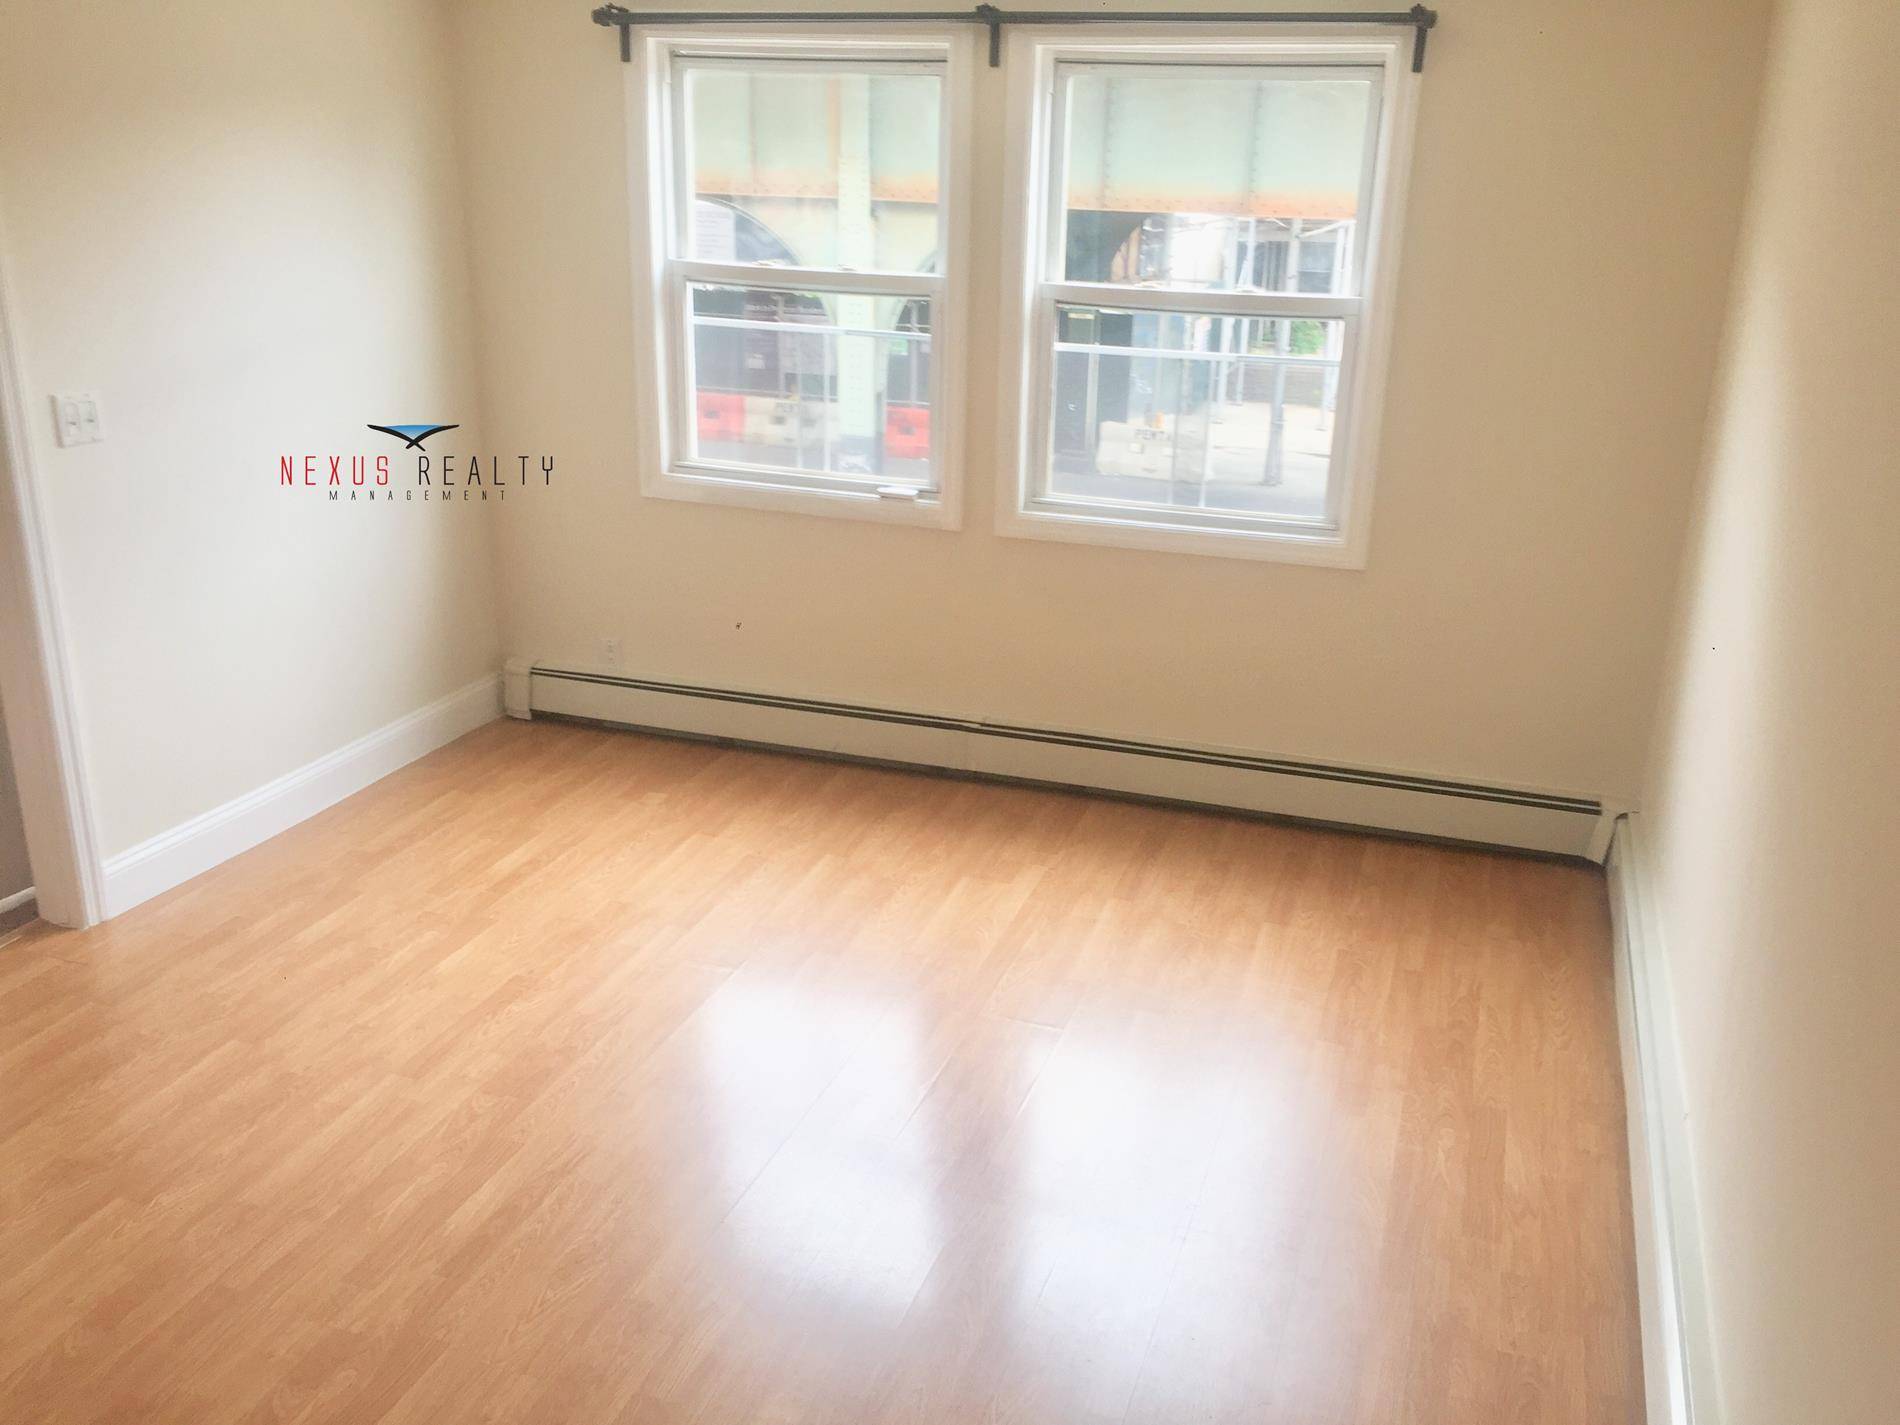 Freshly renovated duplex 2 Bedroom apartment in Astoria ONLY 22002 Sunny bedrooms on the 3rd floor of a private houseBrand new kitchen with granite floor tiles, huge countertop, and great ...